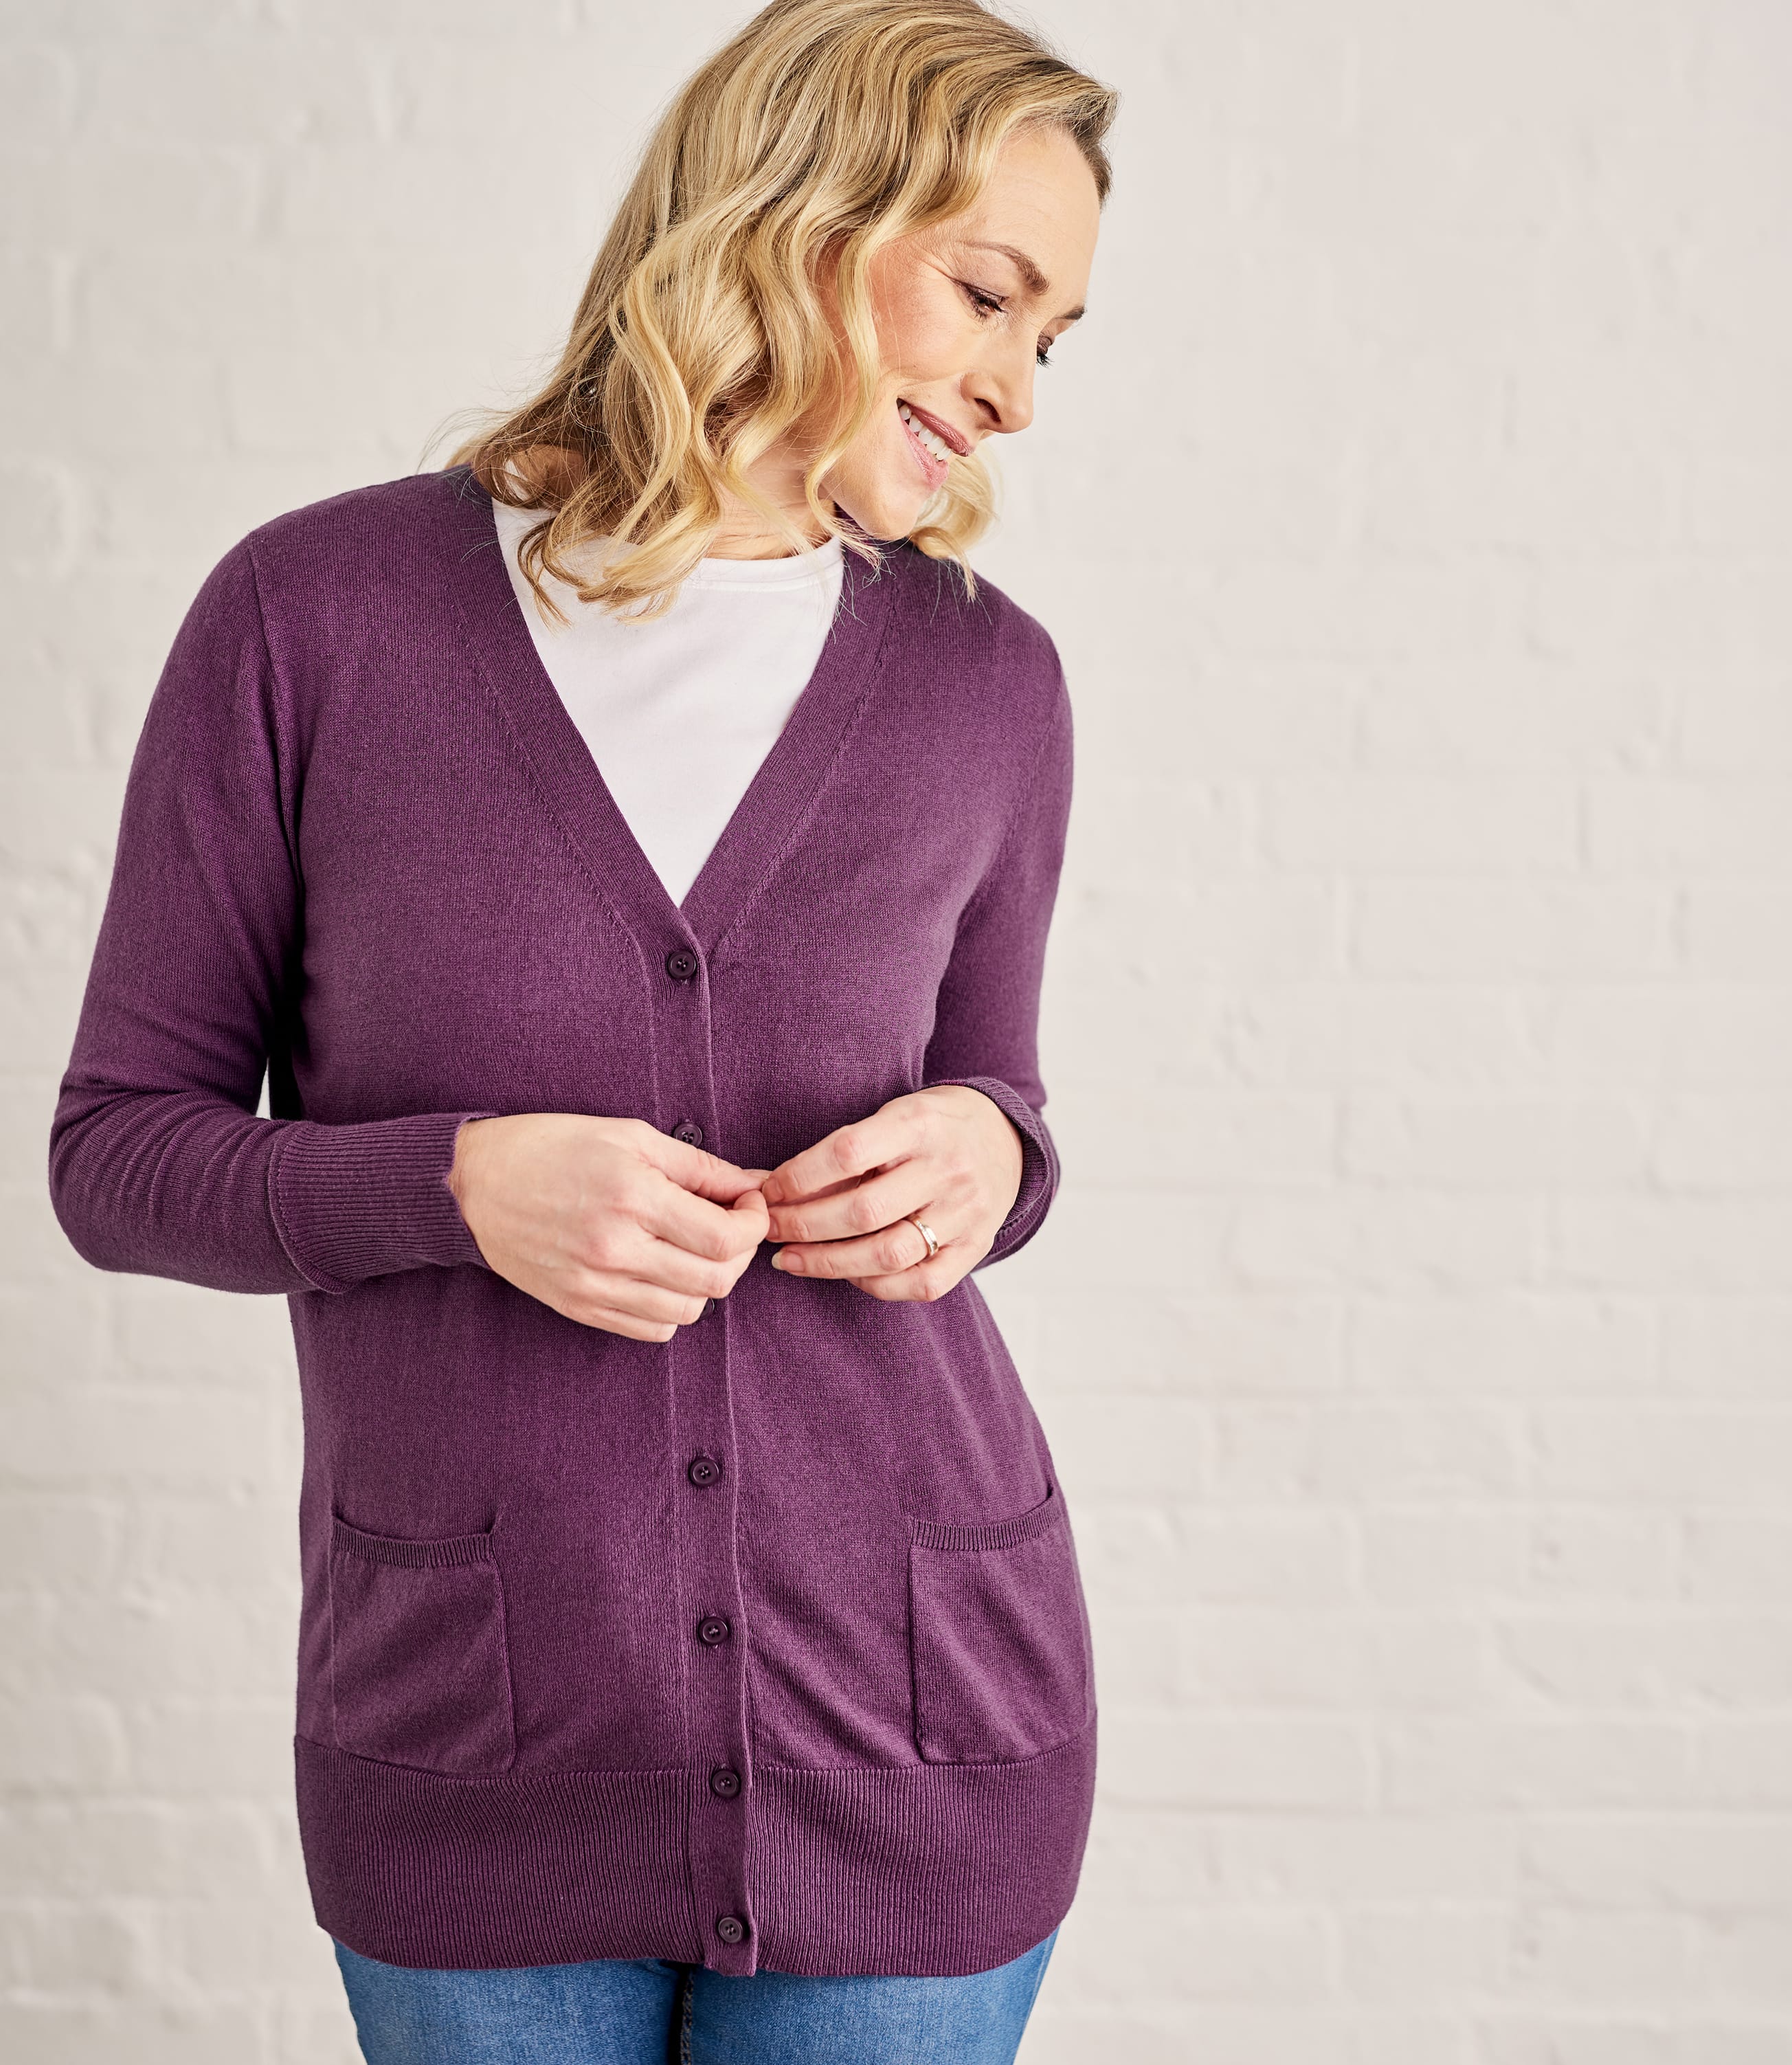 Save Up To 50% on Cardigans | Cardigan Clearance | WoolOvers UK